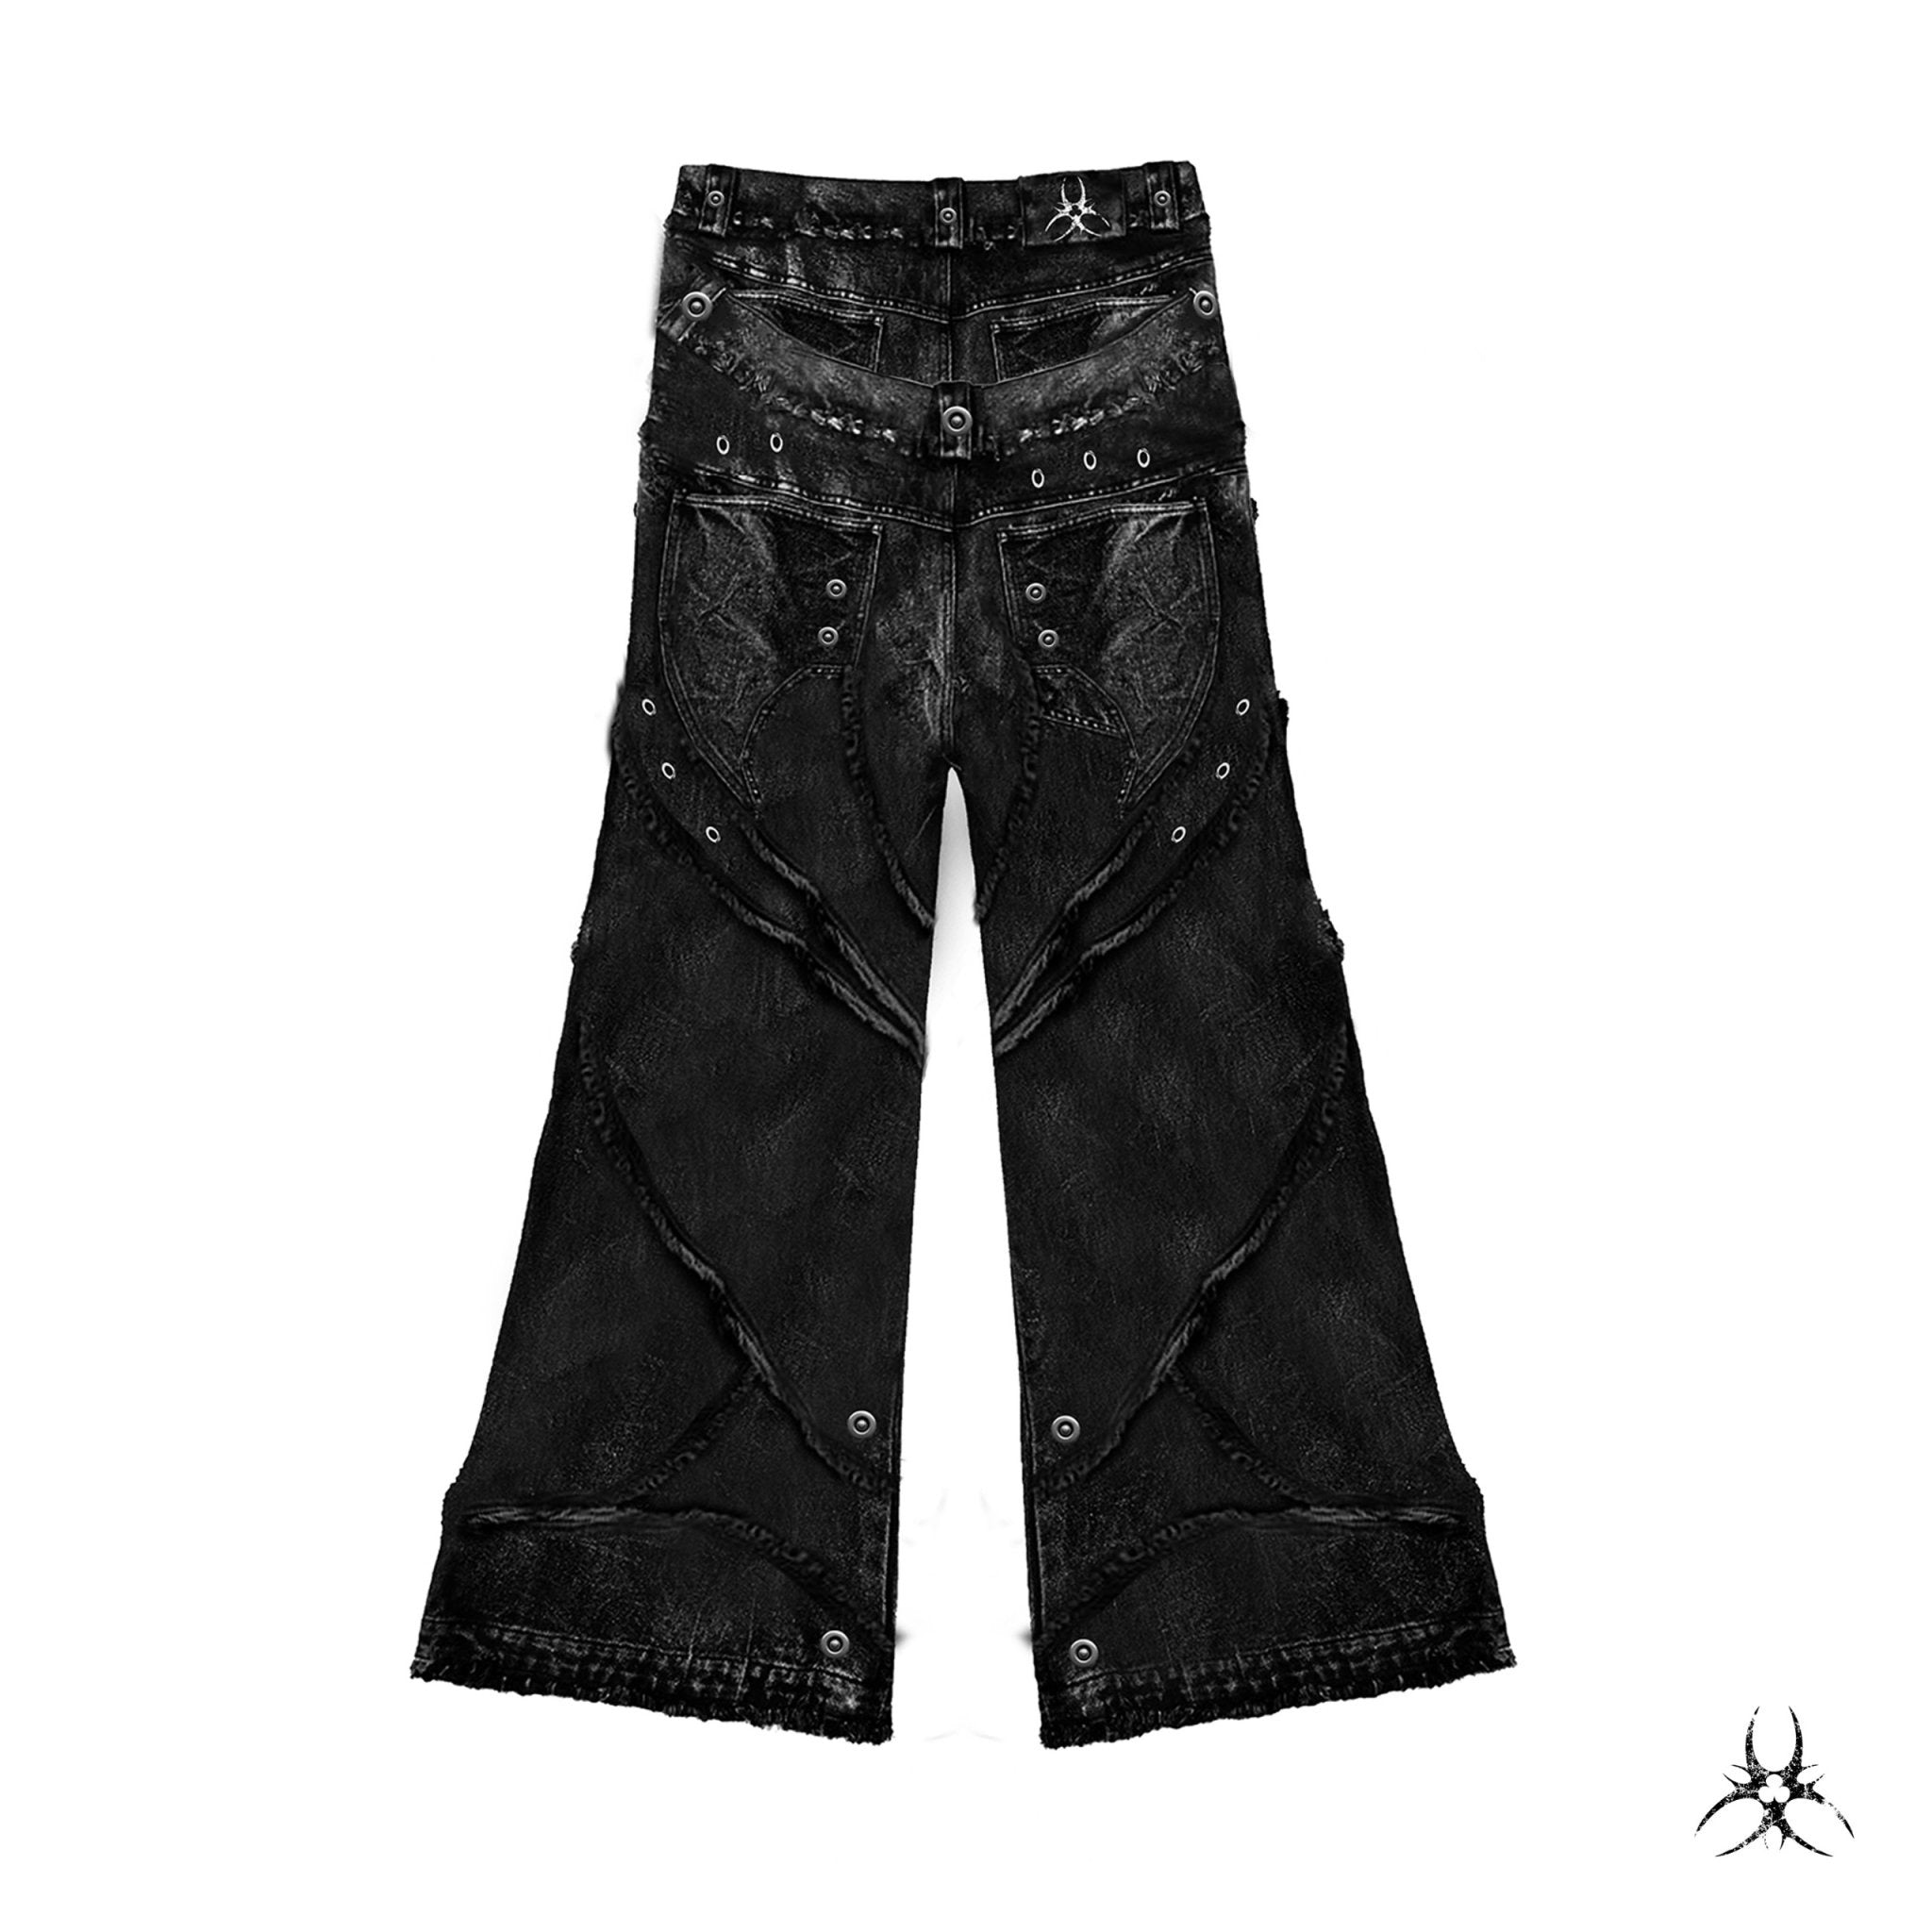 00 KNIGHT CLUB BAGGY FLARE JEANS – COZY WORLDWIDE